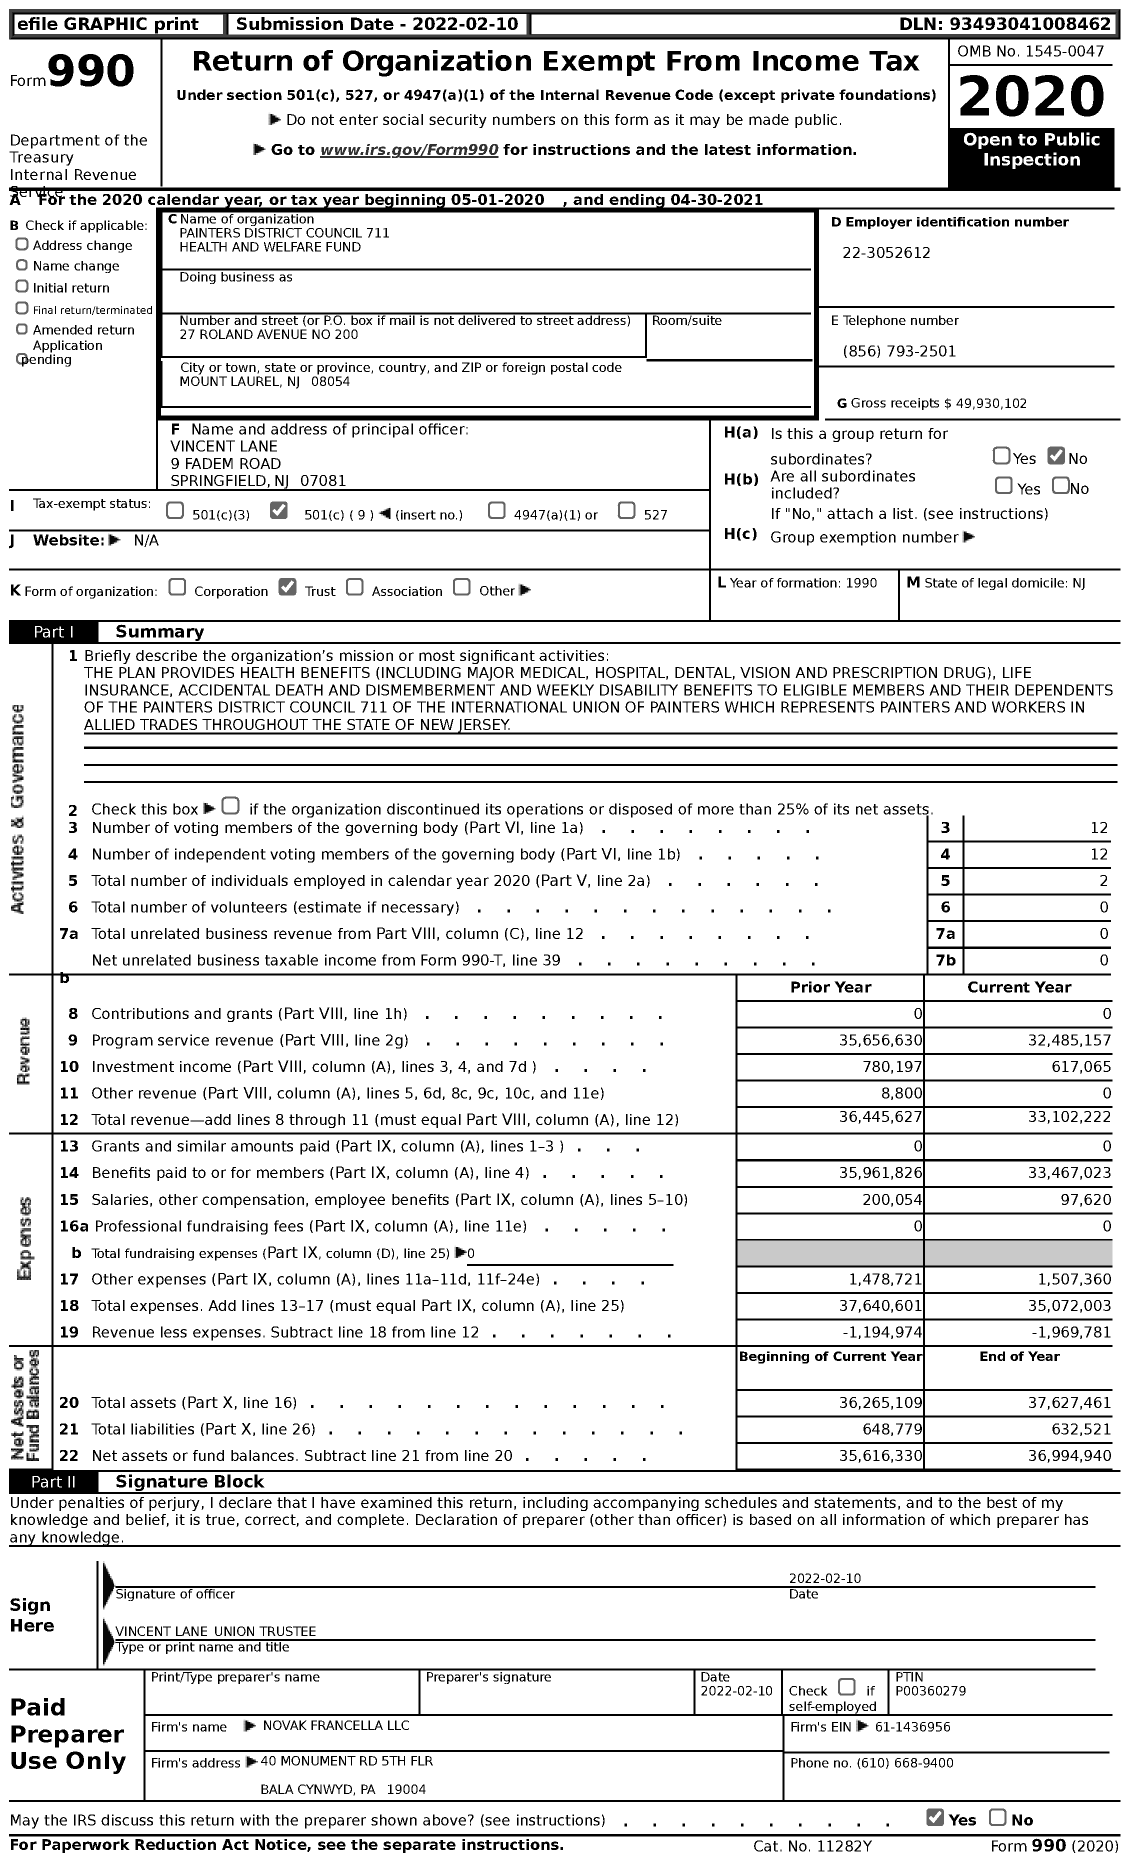 Image of first page of 2020 Form 990 for Painters District Council 711 Health and Welfare Fund